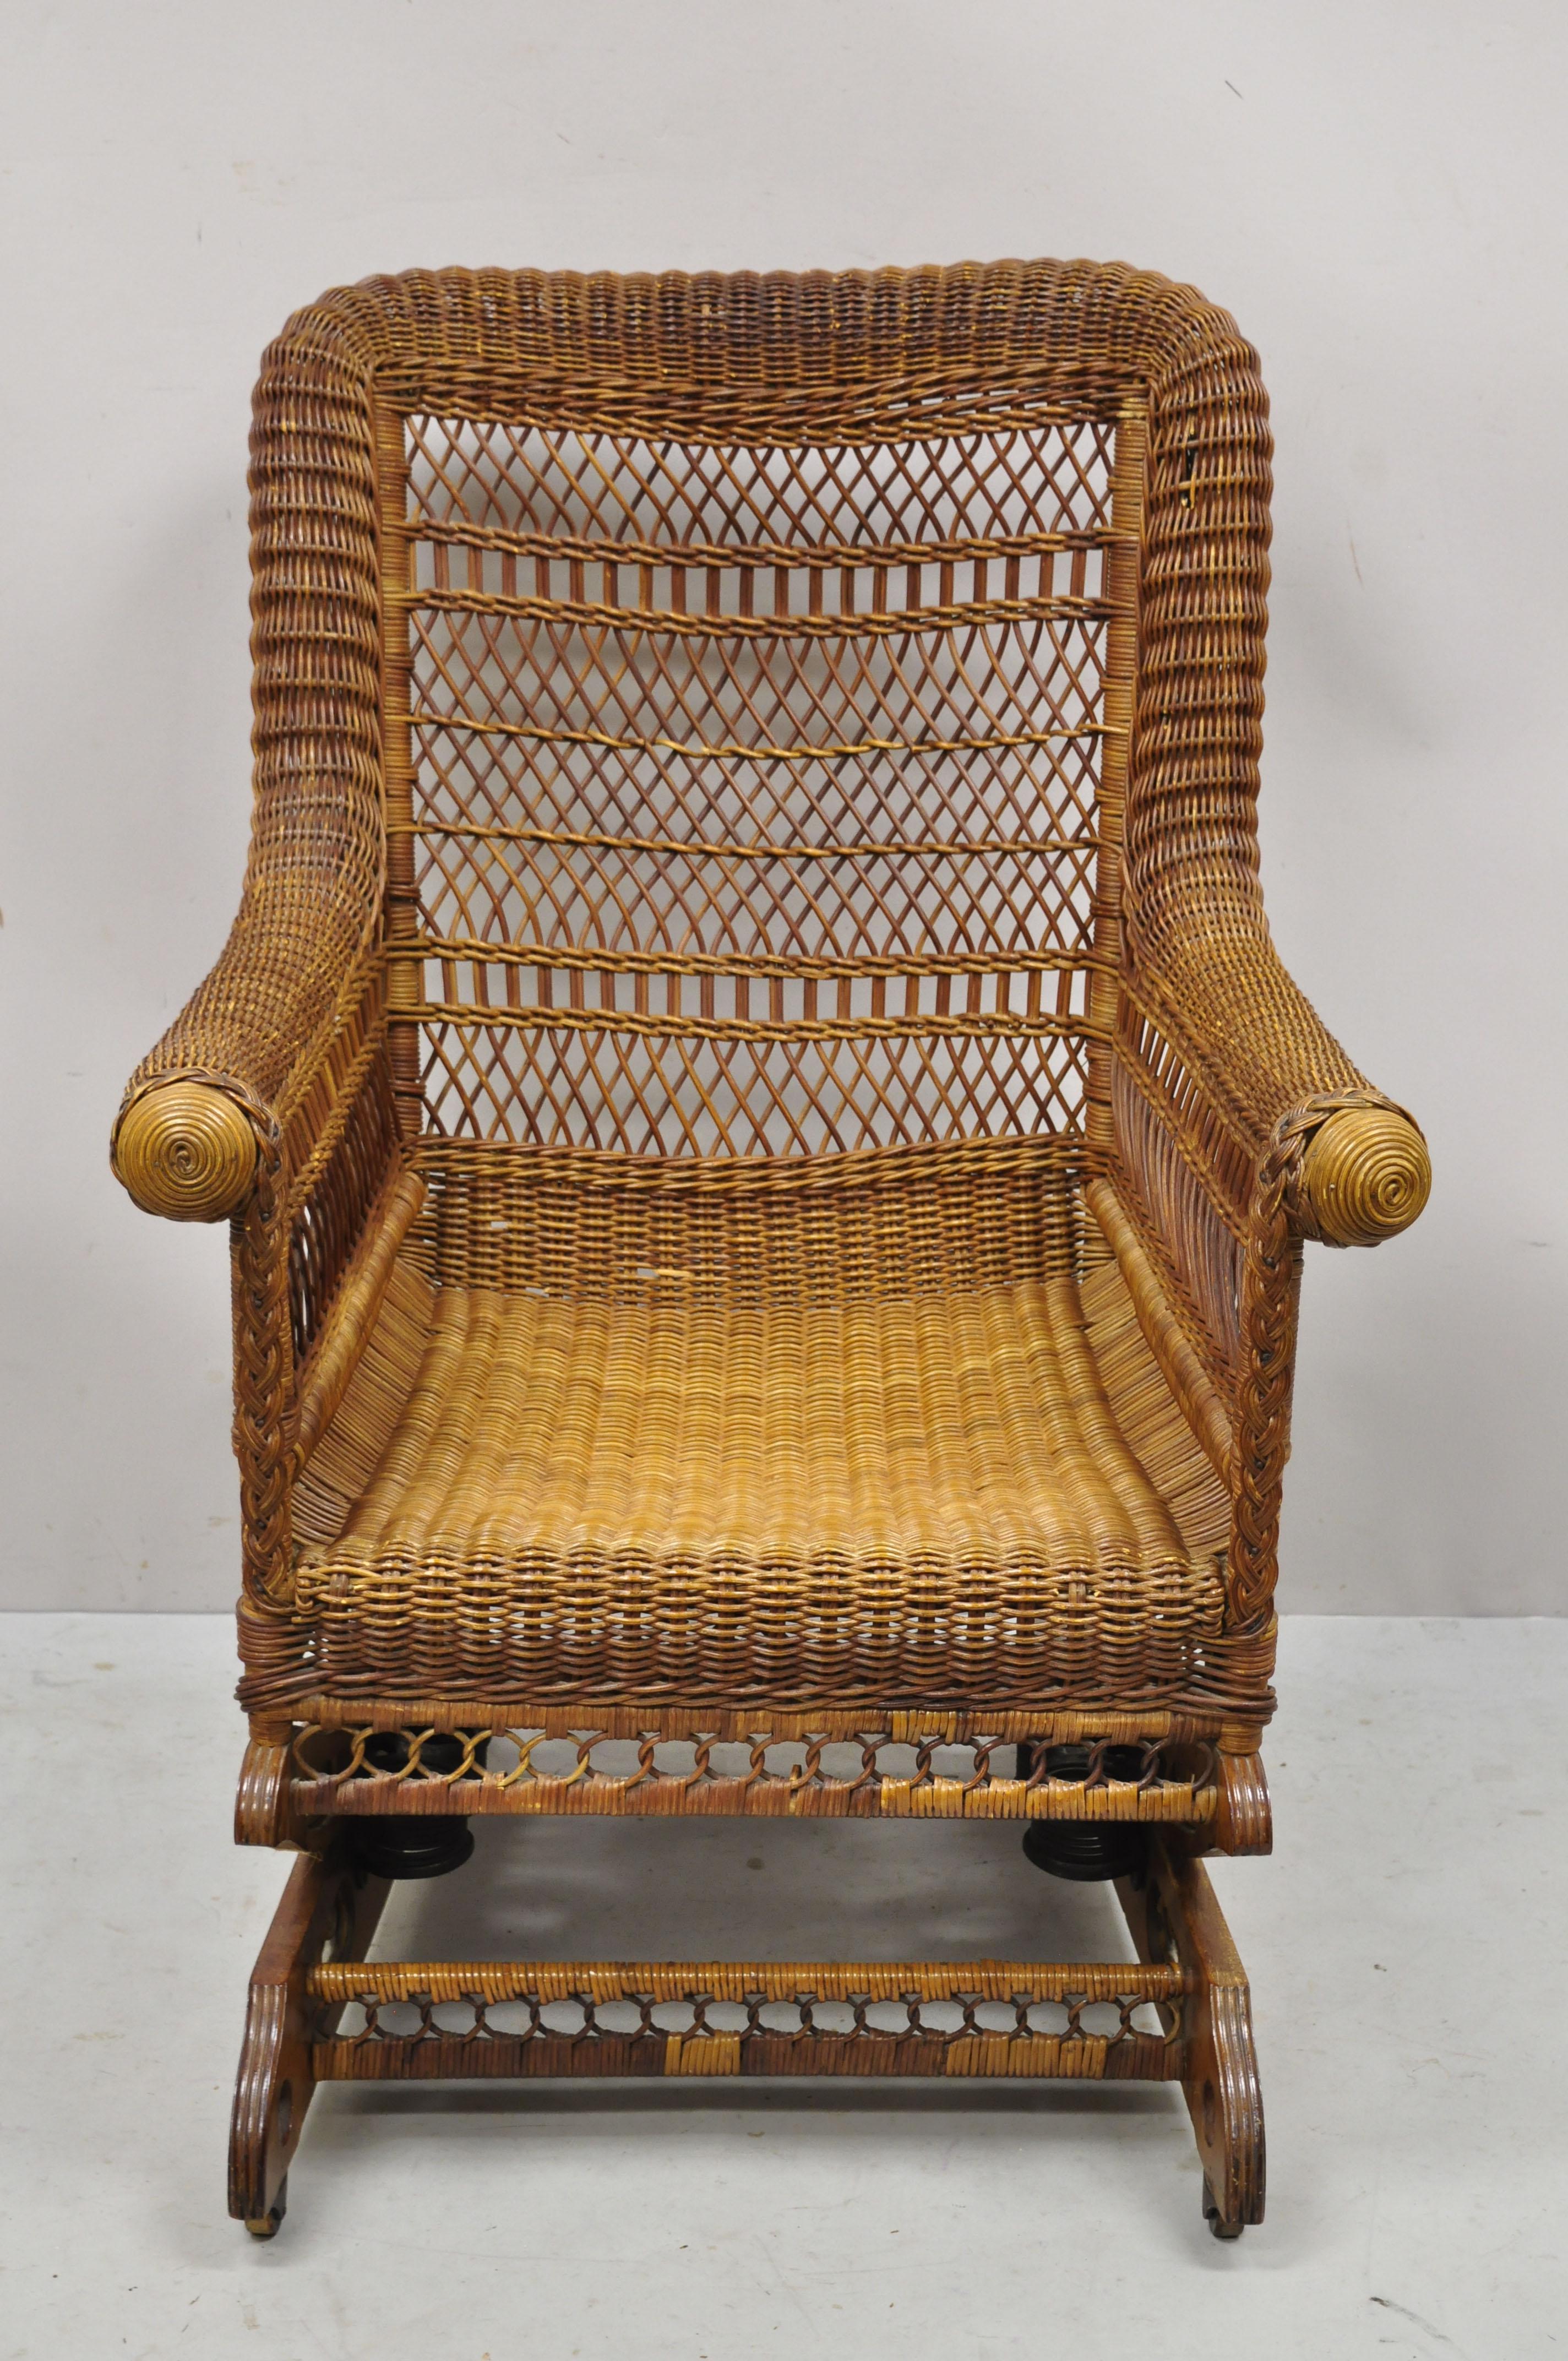 Antique Heywood Wakefield Woven Wicker Victorian platform rocker rocking chair. Item features carved wood platform rocker base with rolling casters, ornate woven wicker wrapped frame, rolled arms, remnants of original label, very nice antique item,